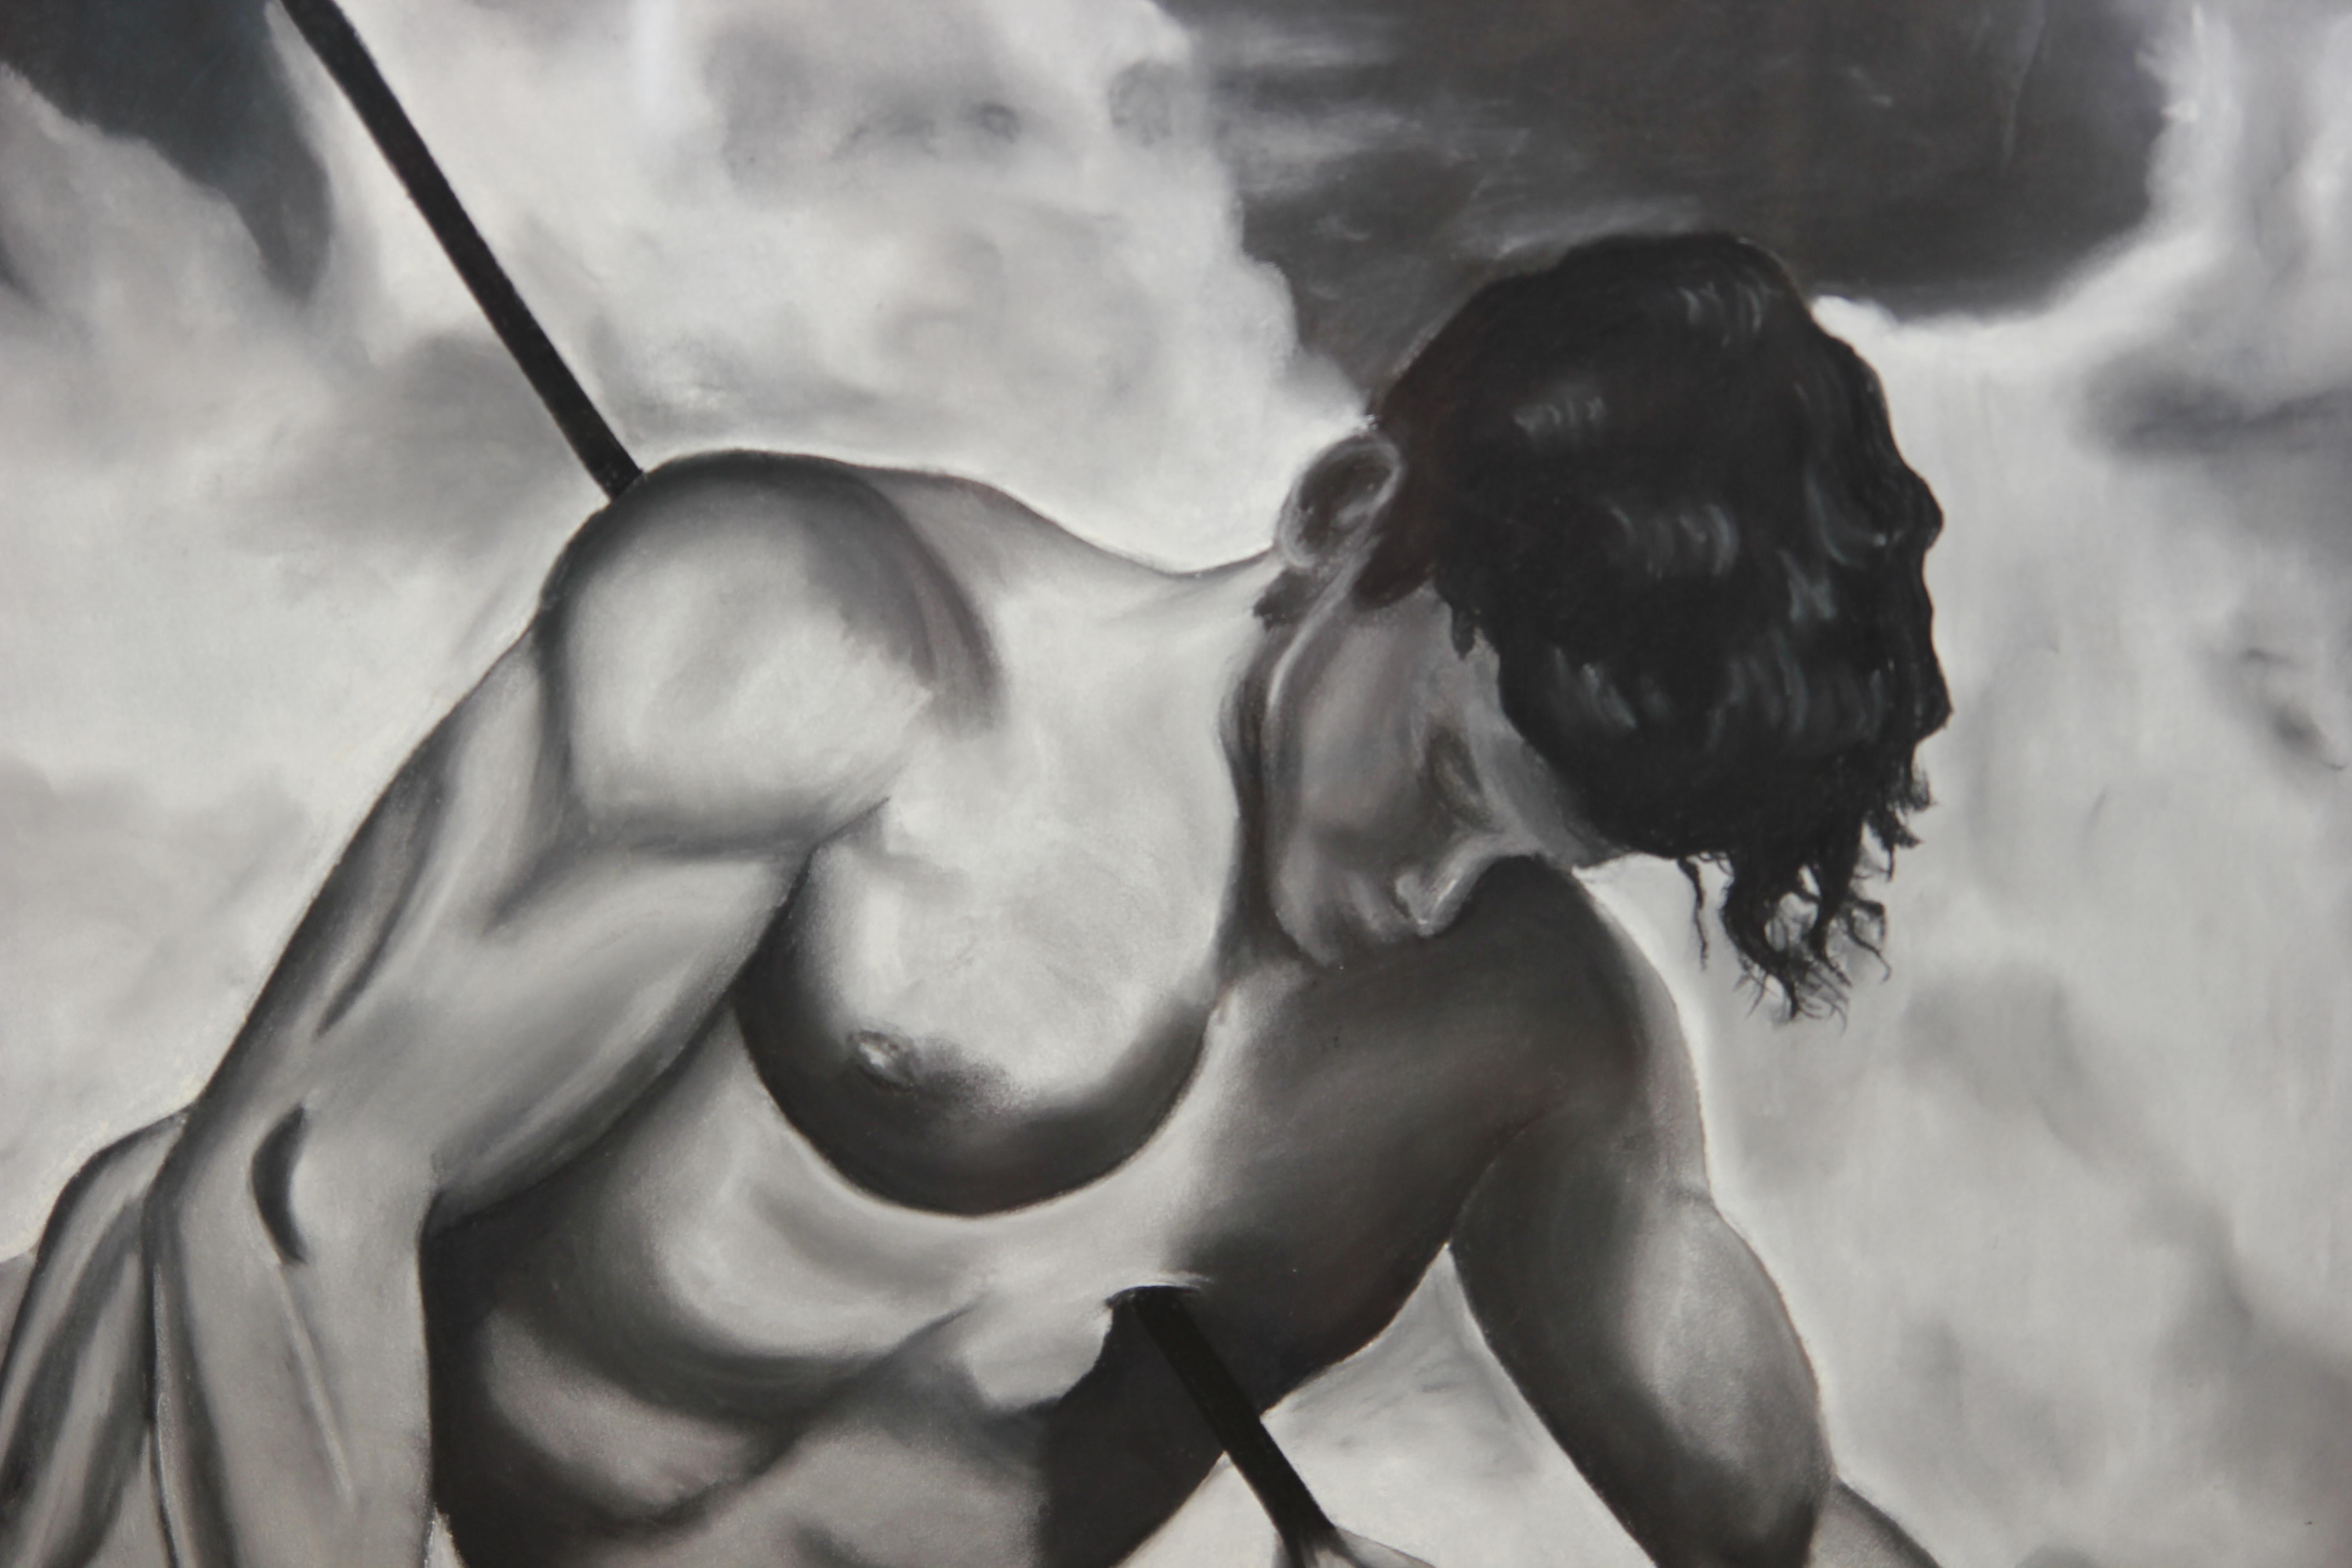 Naturalistic Adonis Like Speared Figure - Painting by M. Decker